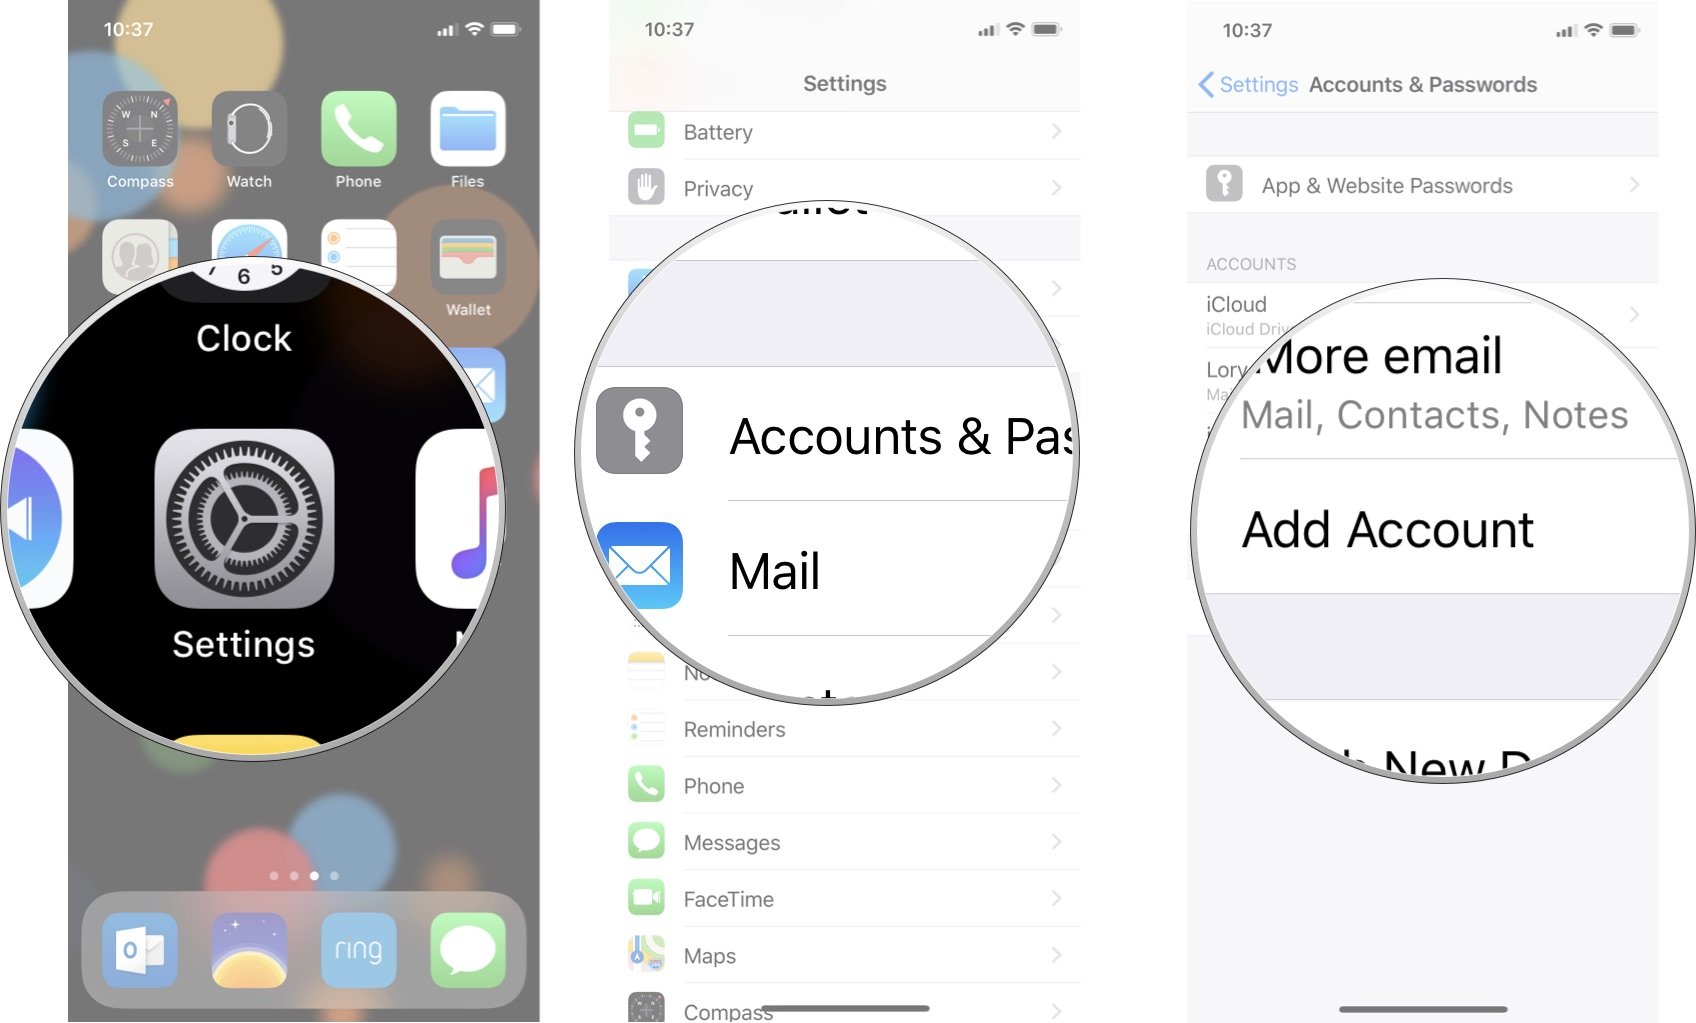 Launch the Settings app, tap on Accounts and Passwords, and then tap on the Add account button.